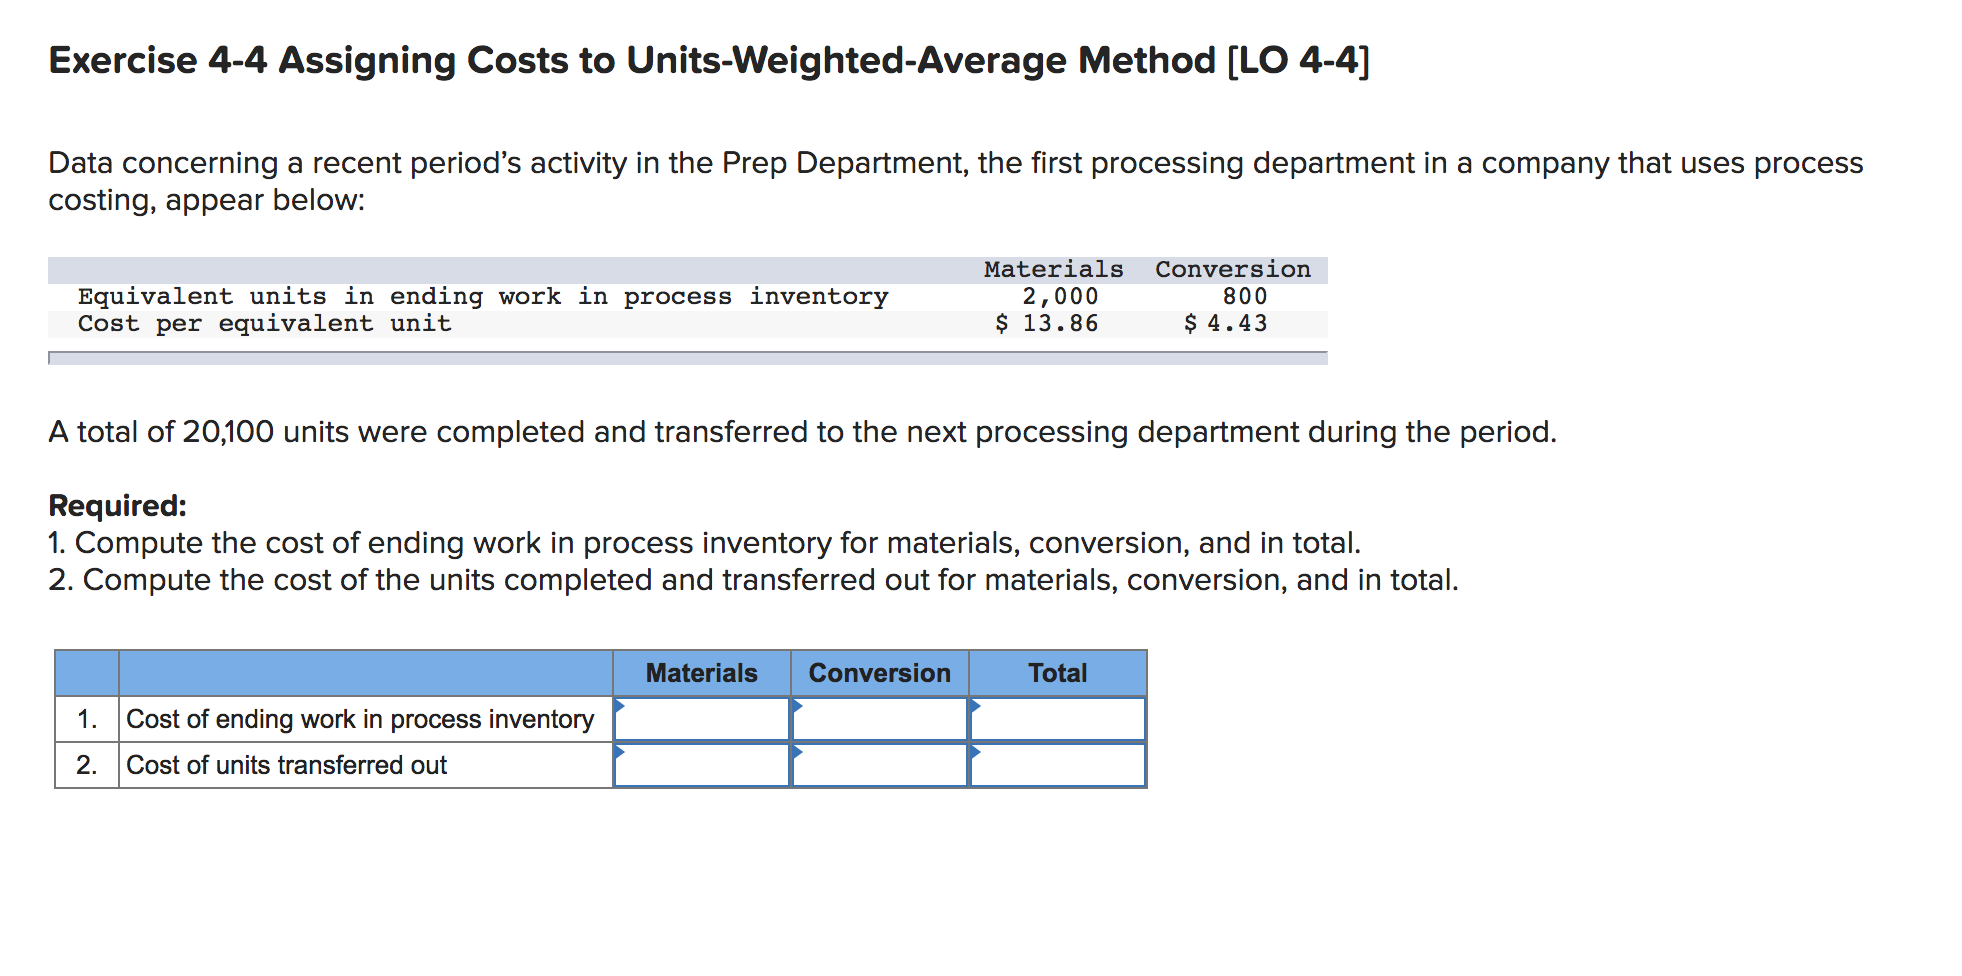 Exercise 4-4 Assigning Costs to Units-Weighted-Average Method [LO 4-4]
Data concerning a recent period's activity in the Prep Department, the first processing department in a company that uses process
costing, appear below:
Materials
Conversion
800
$ 4.43
Equivalent units in ending work in process inventory
Cost per equivalent unit
2,000
$ 13.86
A total of 20,100 units were completed and transferred to the next processing department during the period.
Required:
1. Compute the cost of ending work in process inventory for materials, conversion, and in total.
2. Compute the cost of the units completed and transferred out for materials, conversion, and in total.
Materials
Conversion
Total
Cost of ending work in process inventory
1.
2. Cost of units transferred out
